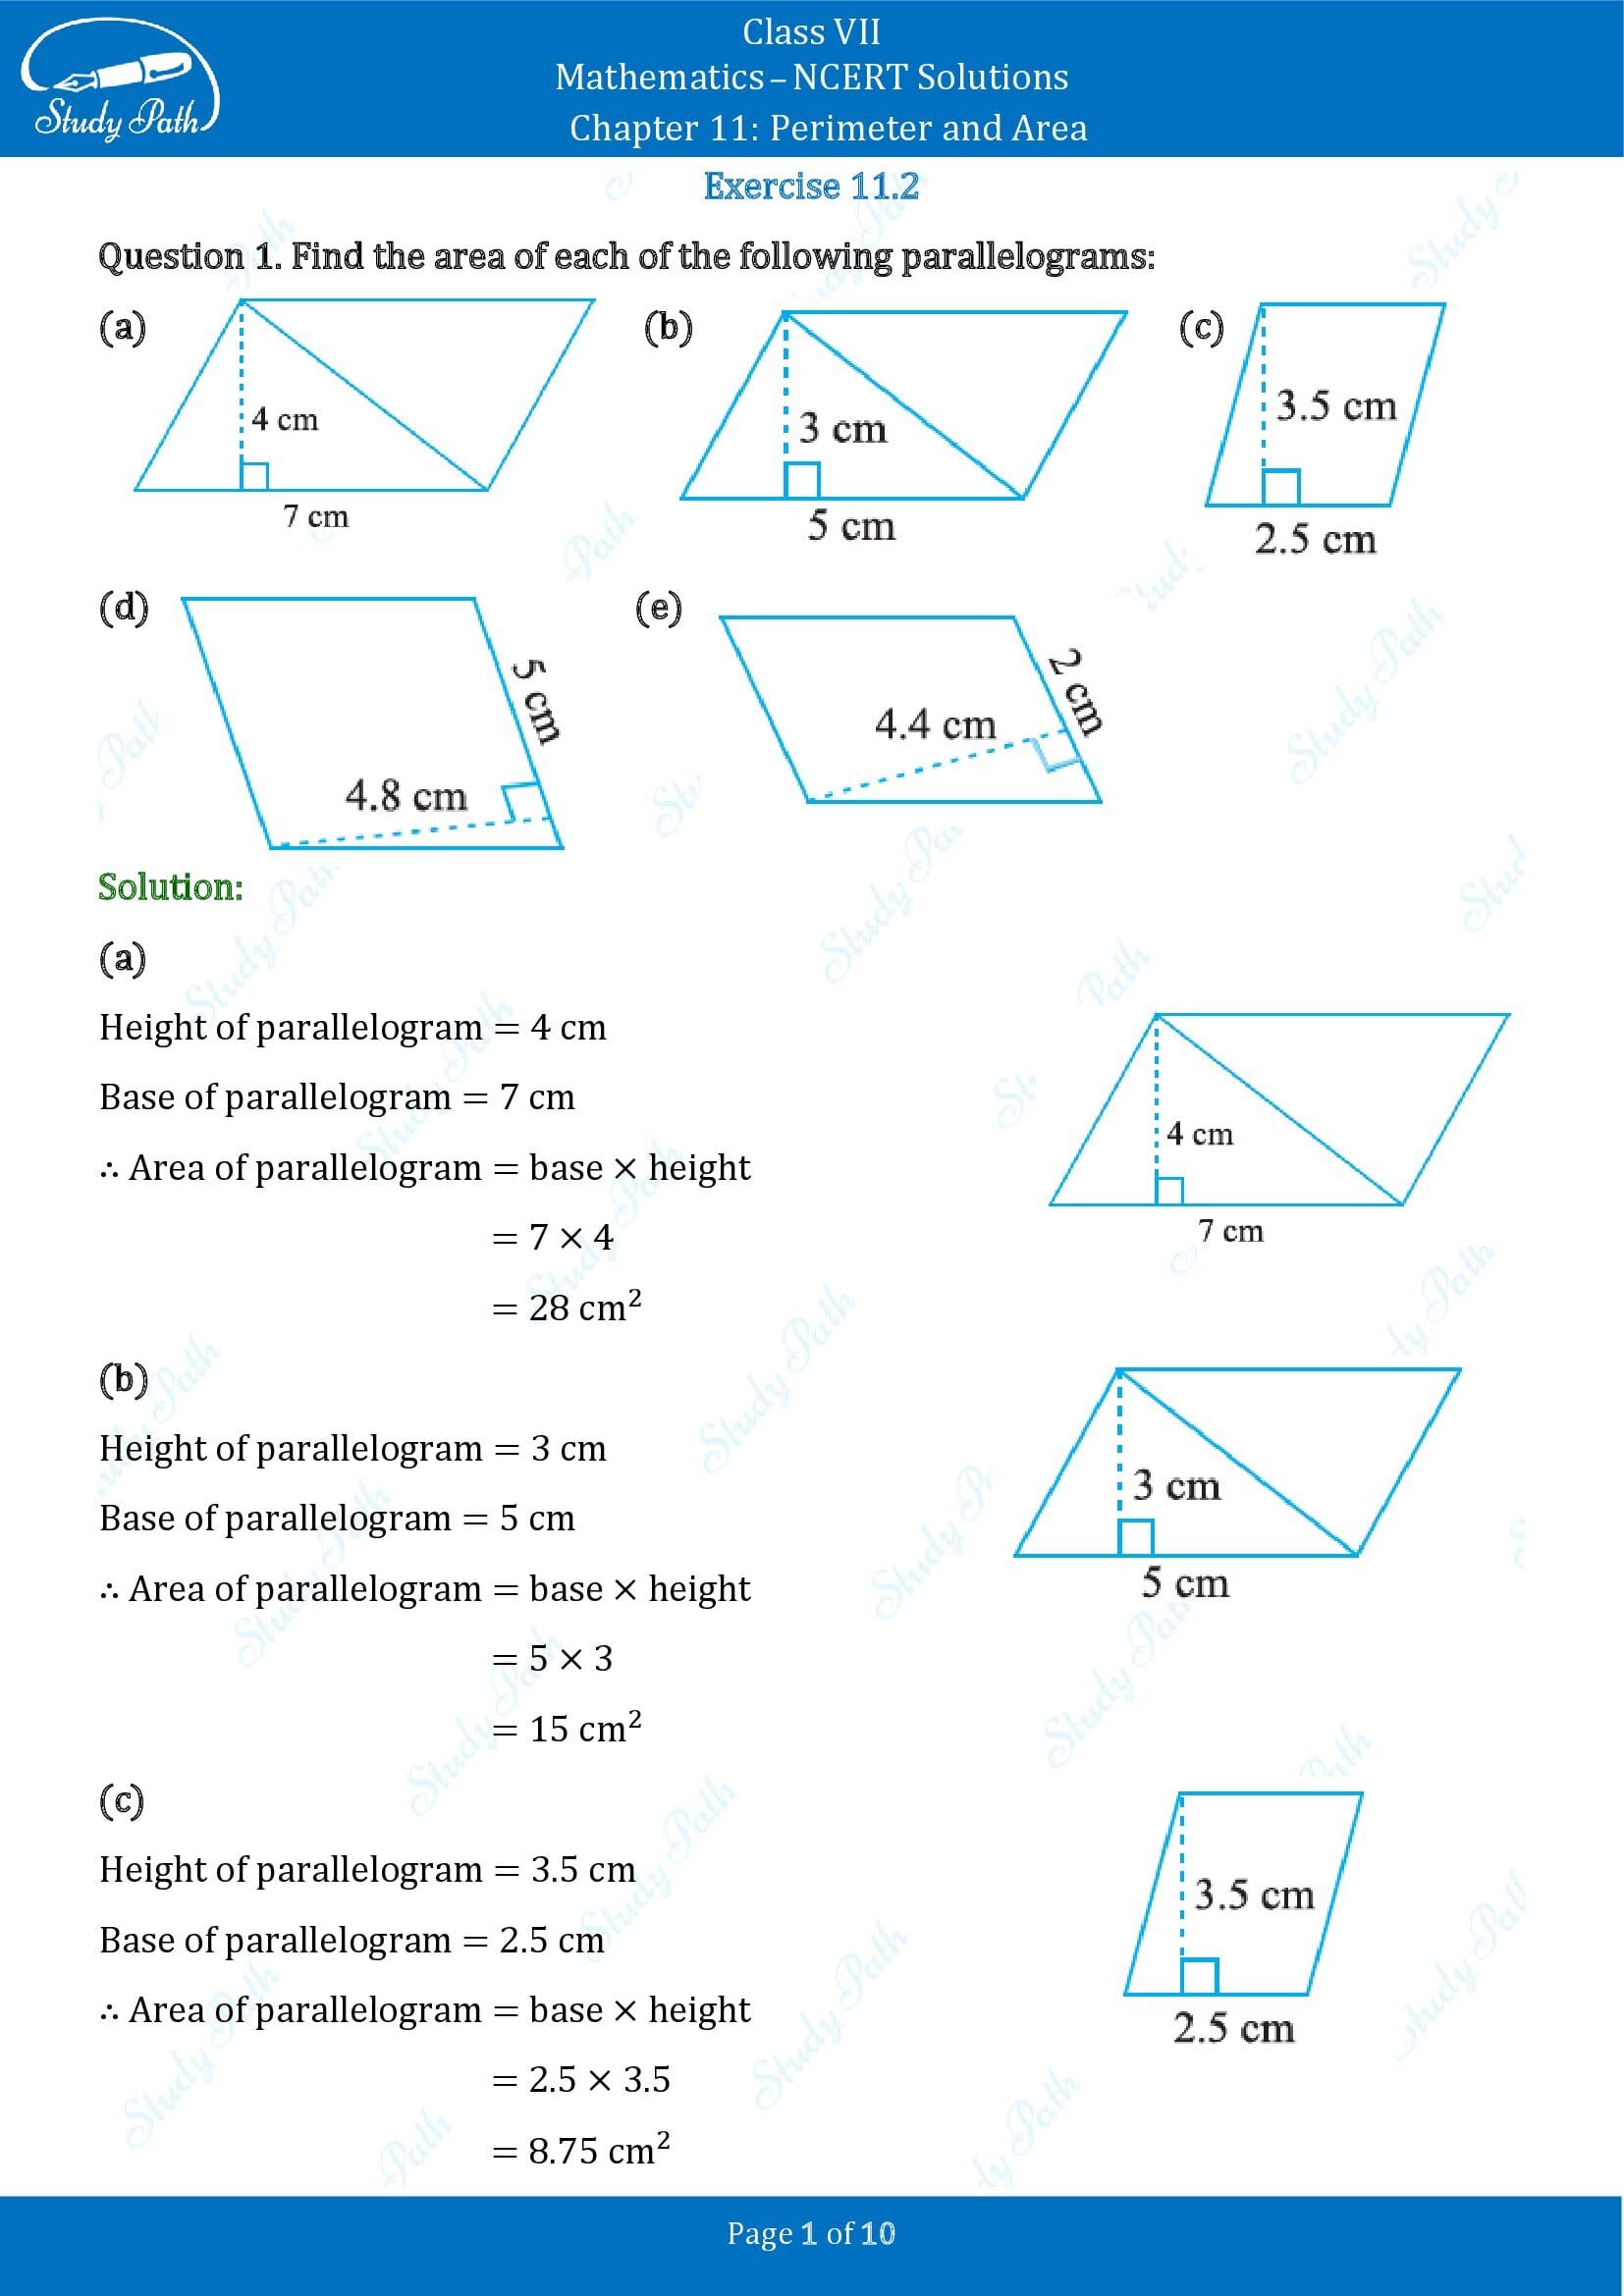 NCERT Solutions for Class 7 Maths Chapter 11 Perimeter and Area Exercise 11.2 00001